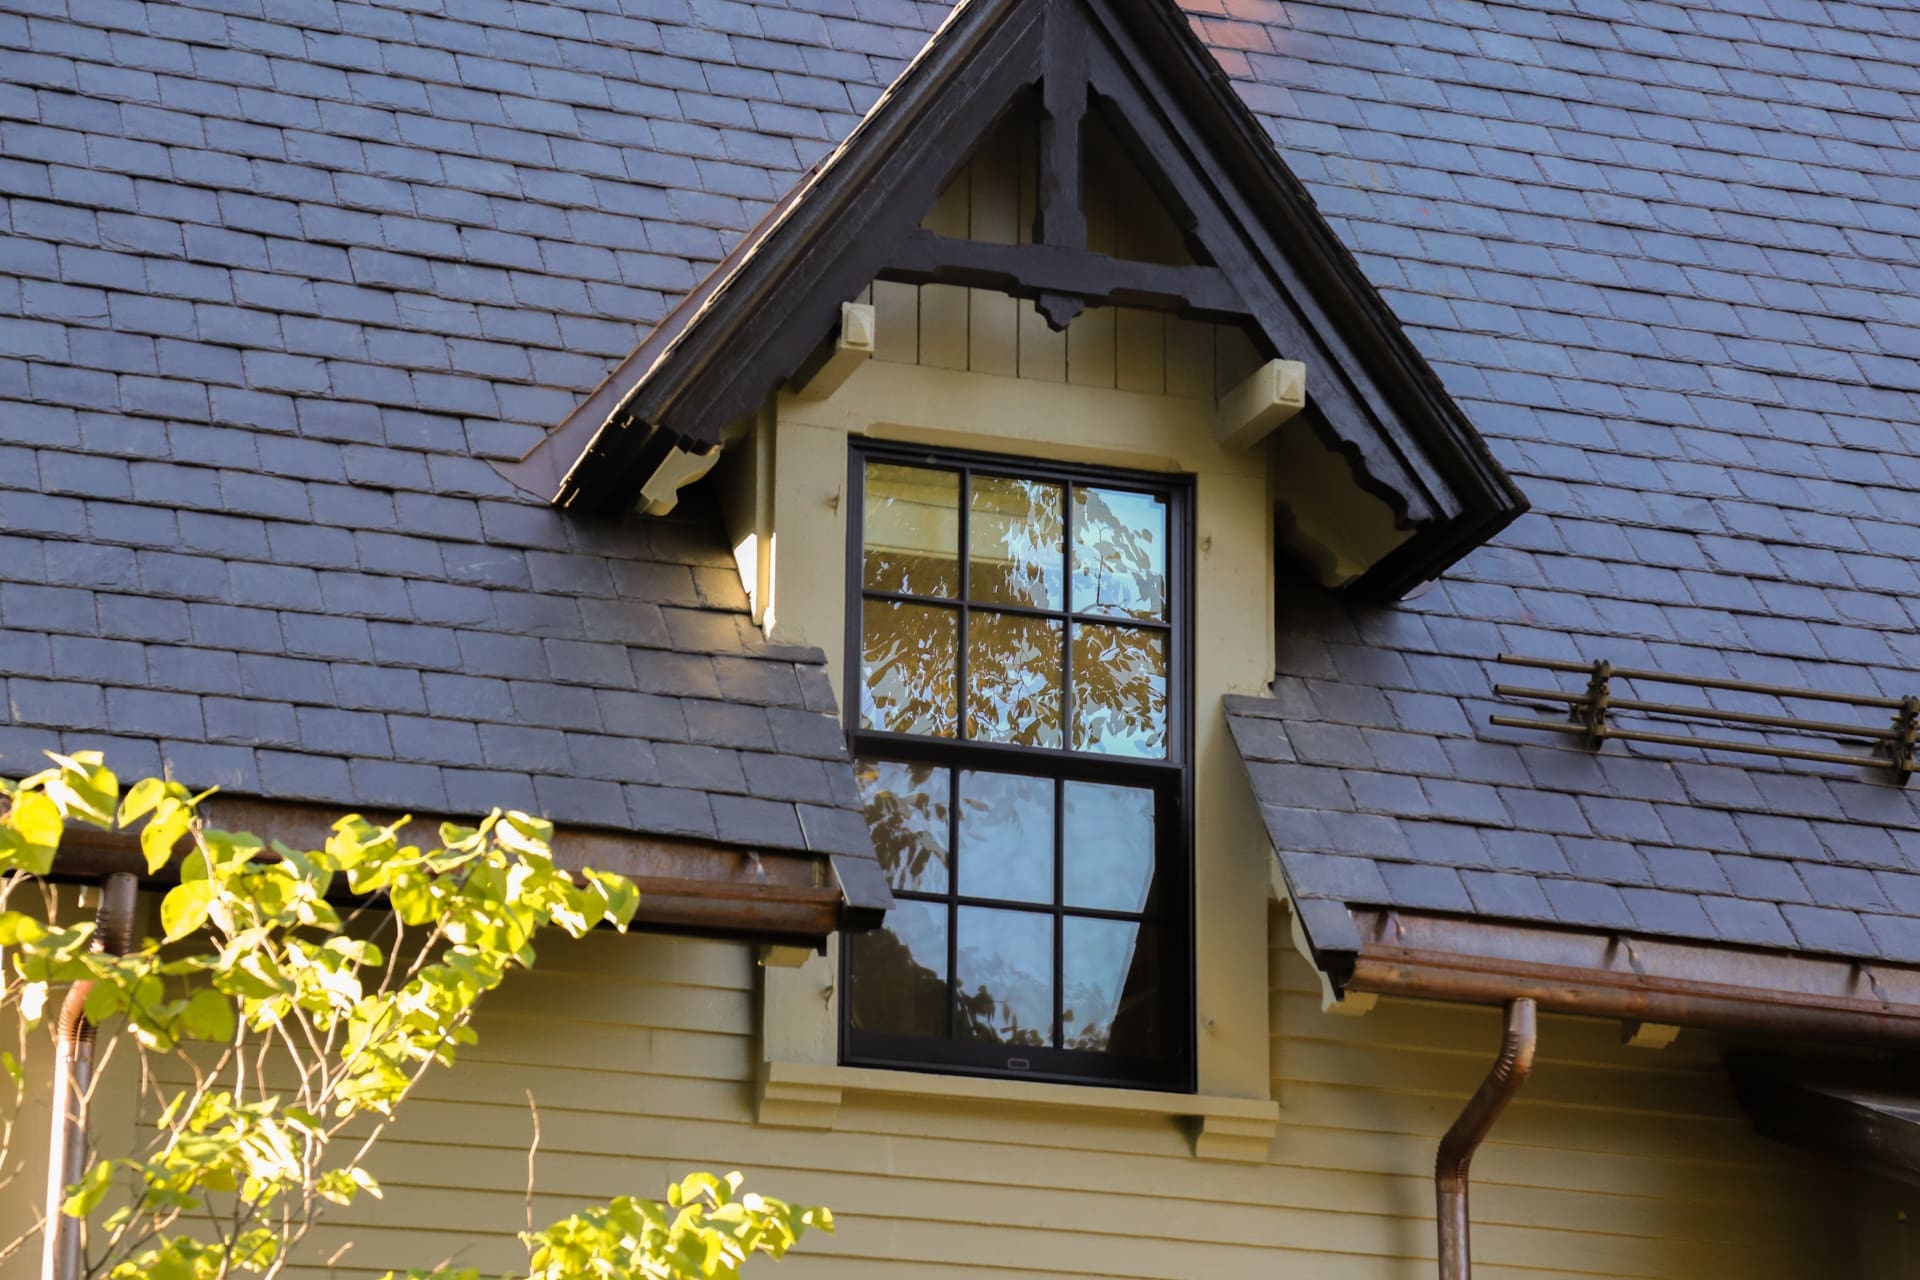 A photo of a grey-green painted house with black stone shingles and a wall dormer window with a painted, black, antique gable bracket.